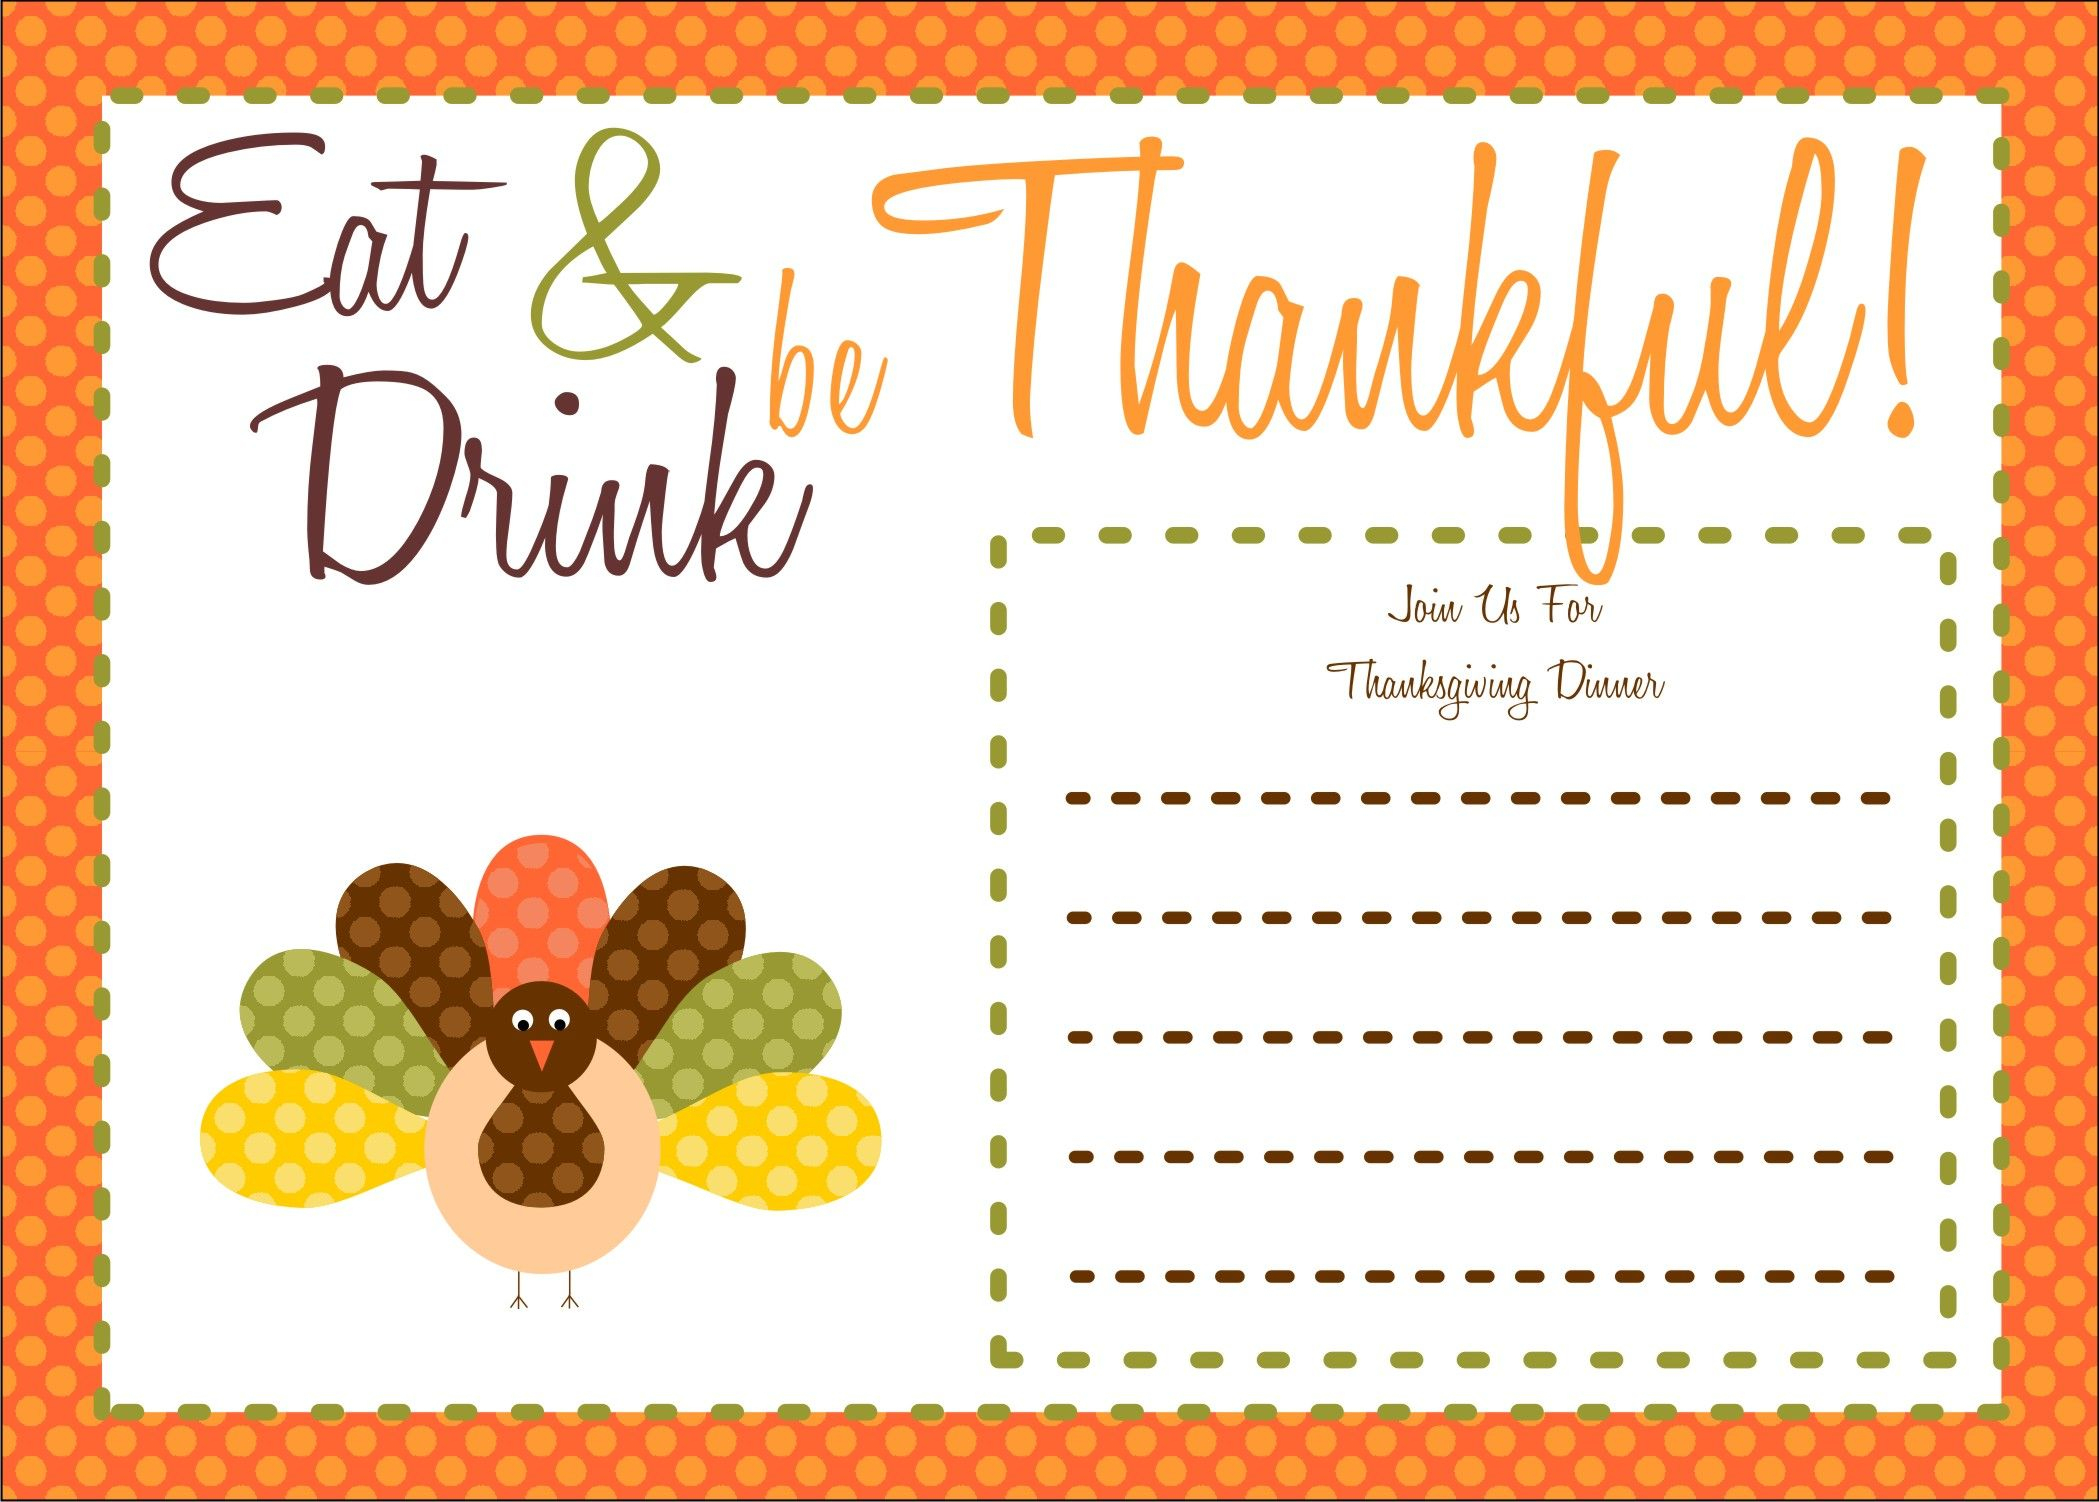 Free Thanksgiving Printables From The Party Bakery | Free Printables - Free Printable Thanksgiving Invitations